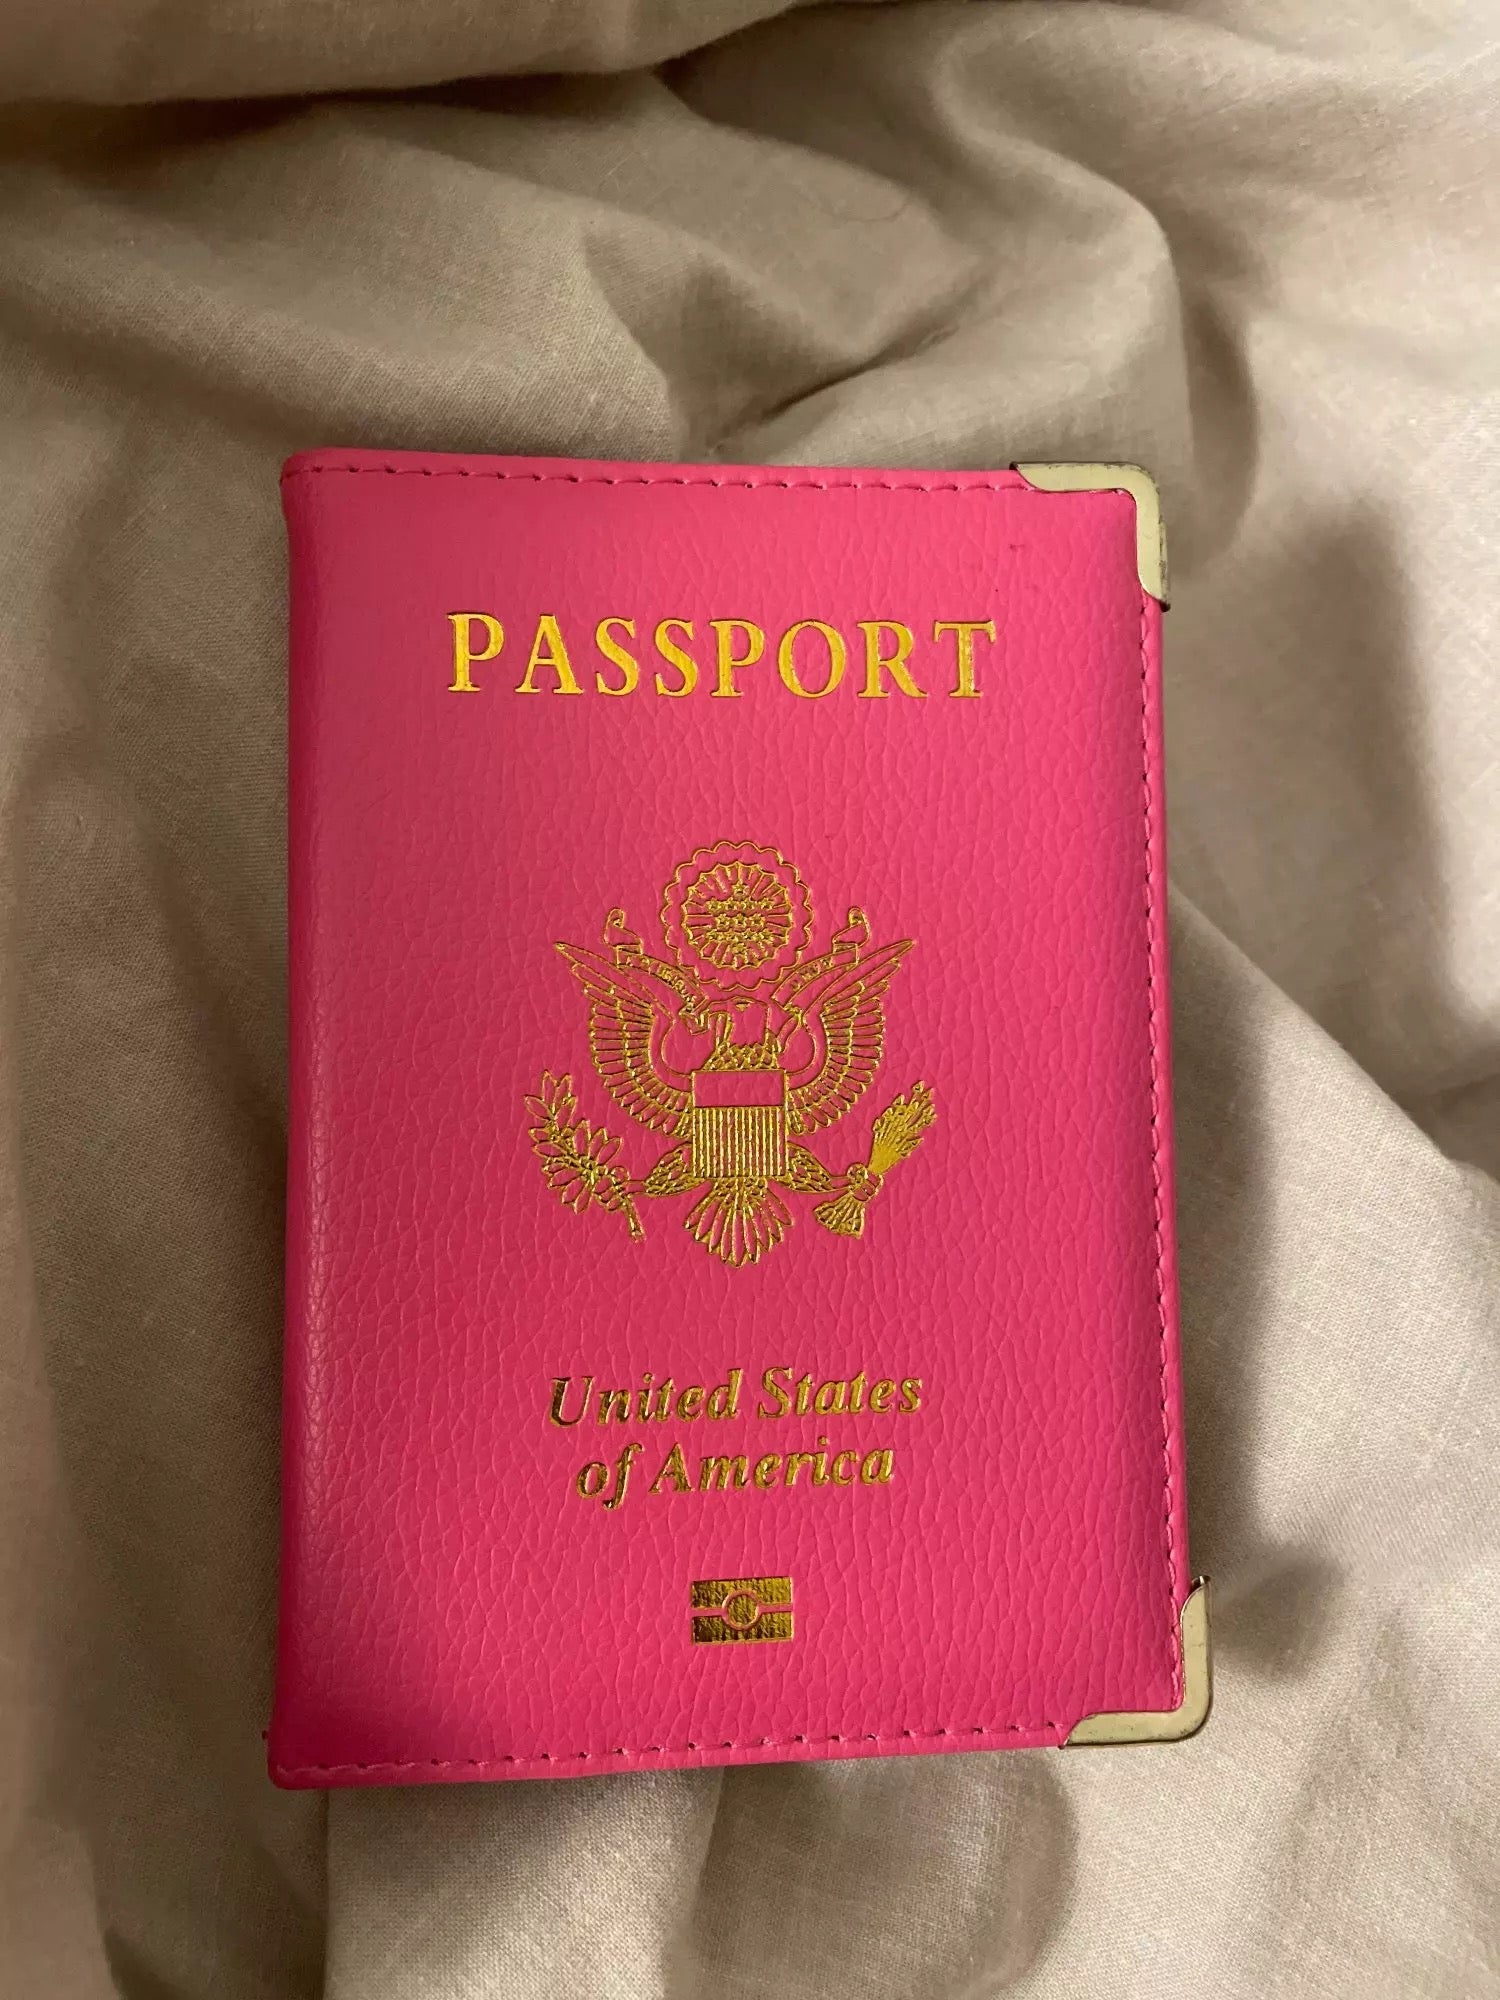 What Your Passport Color Stands For An Exploration of the Meanings Behind Passport Colors